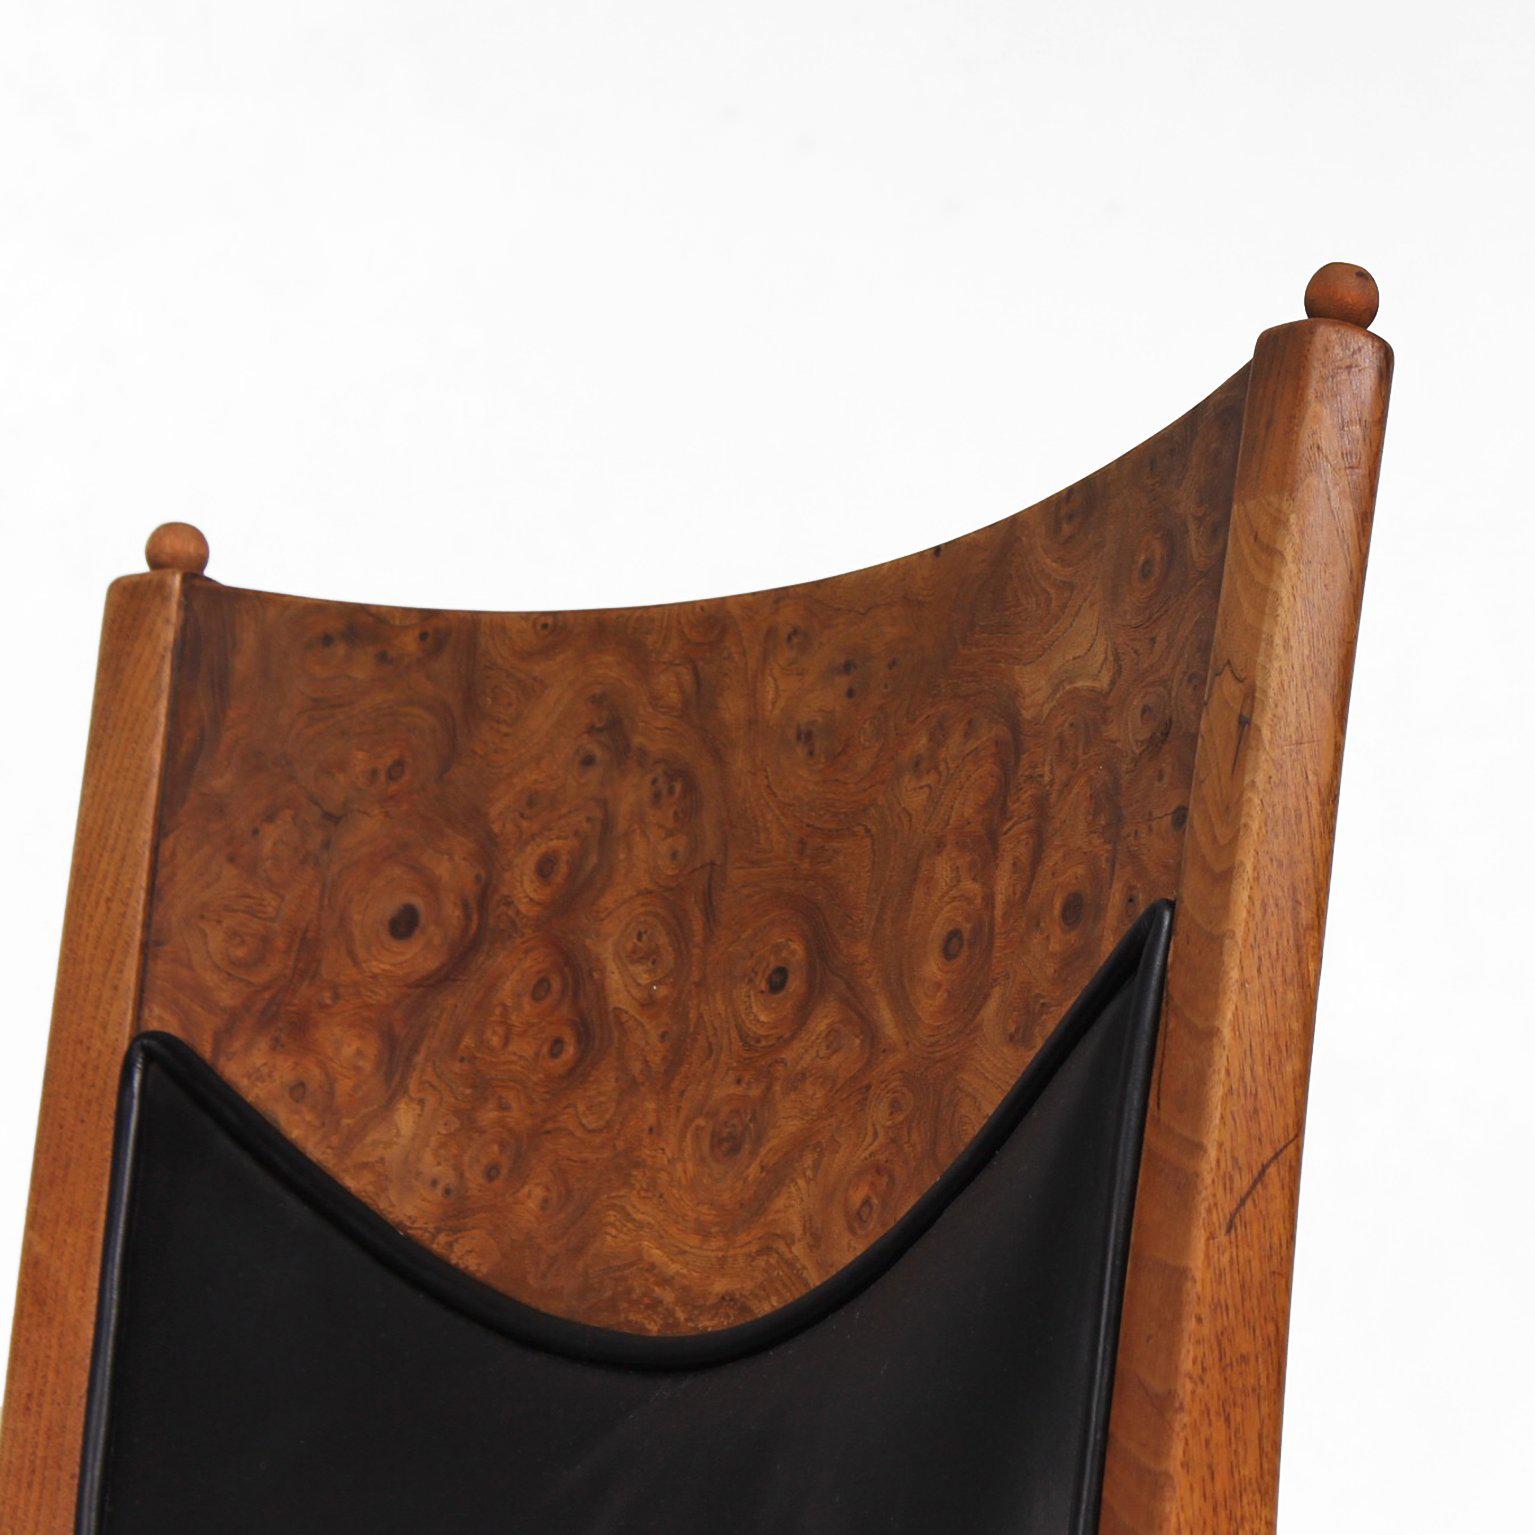 For your consideration a set of four dining chairs. Constructed with solid walnut wood frame and burl wood bent plywood/veneer in back rest. The seat and back rest is upholstered with the original black leather which is decorated with golden starts.